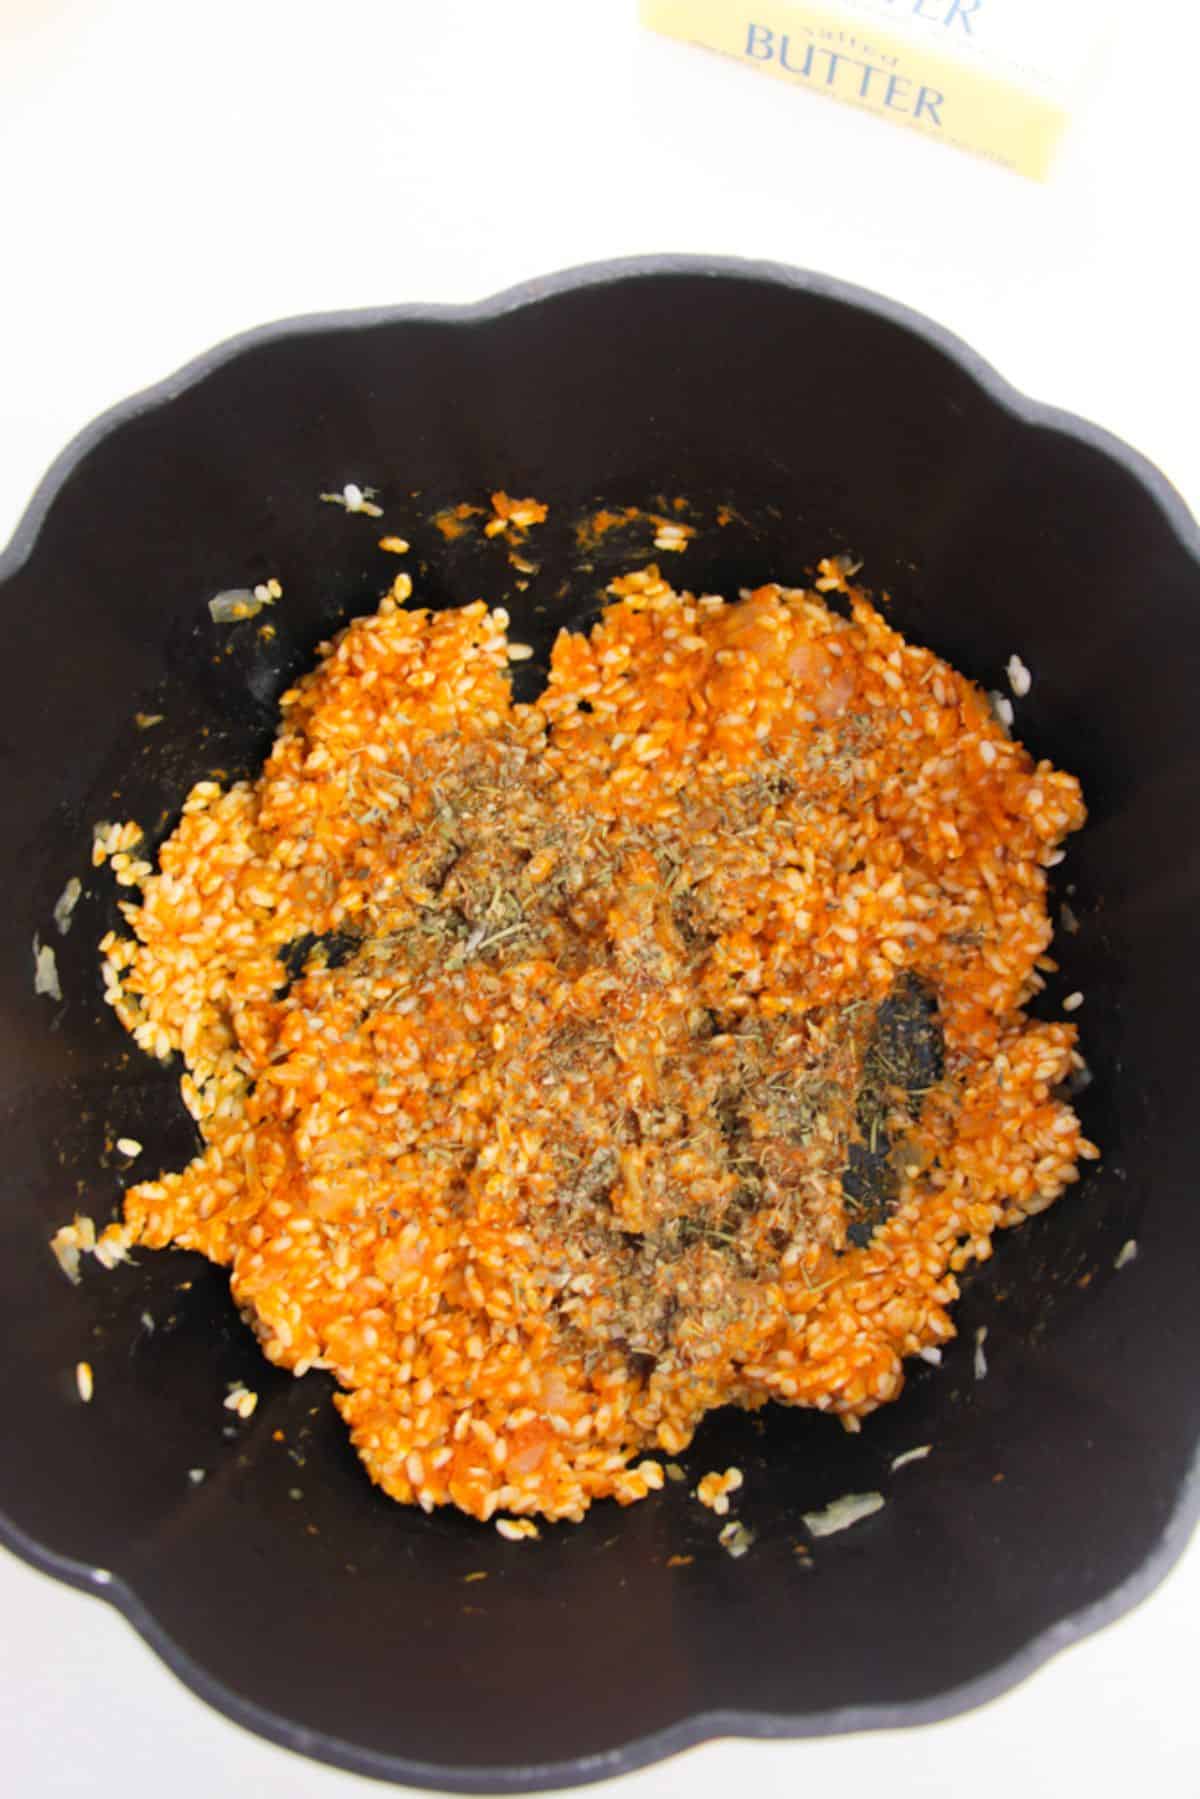 Pumpkin puree and seasoning are added to the rice mixture.